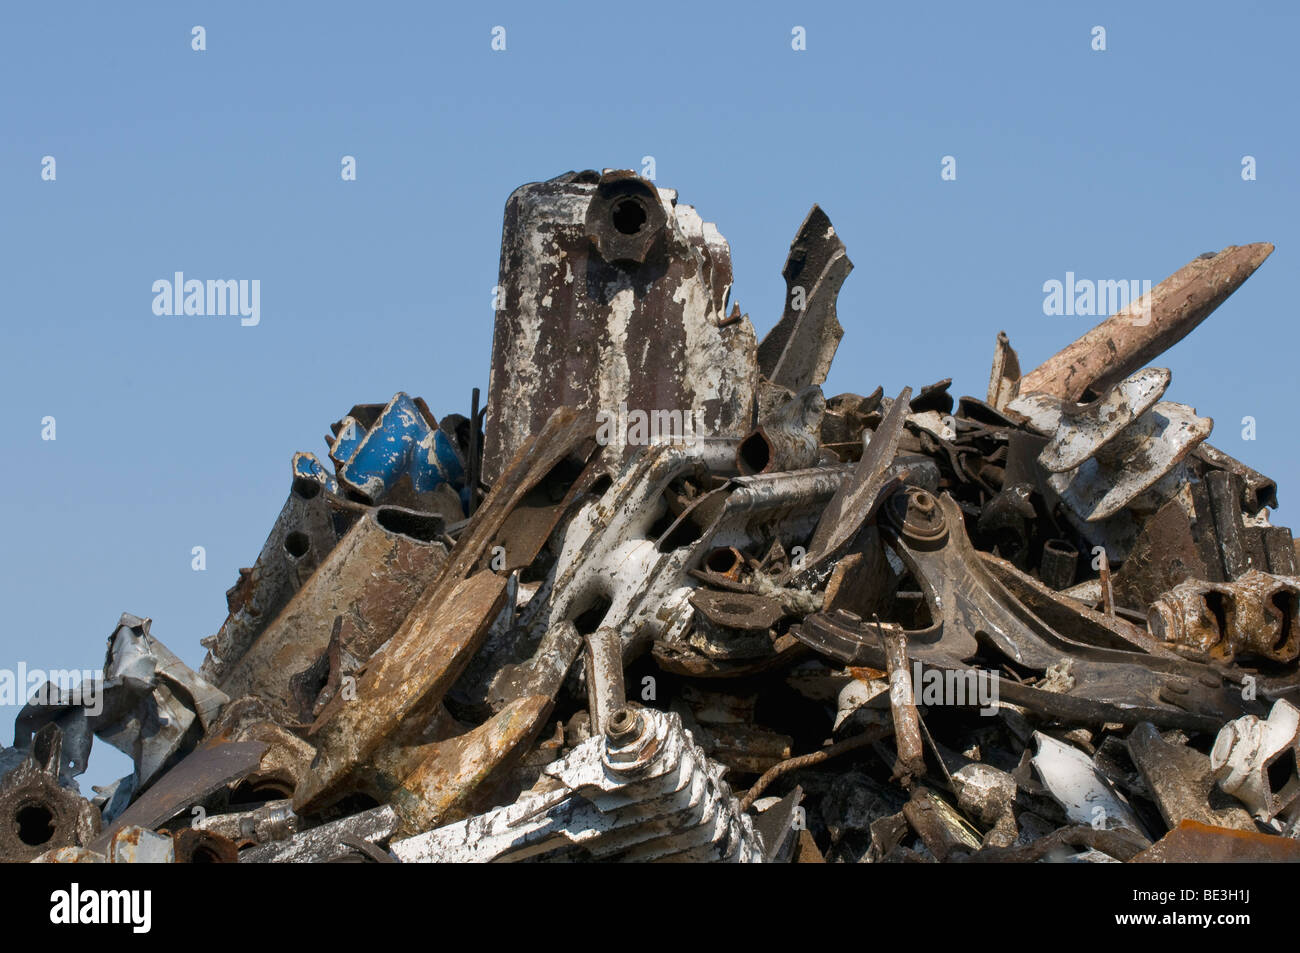 Scrap, waste, scrap metal piled up against a blue sky Stock Photo